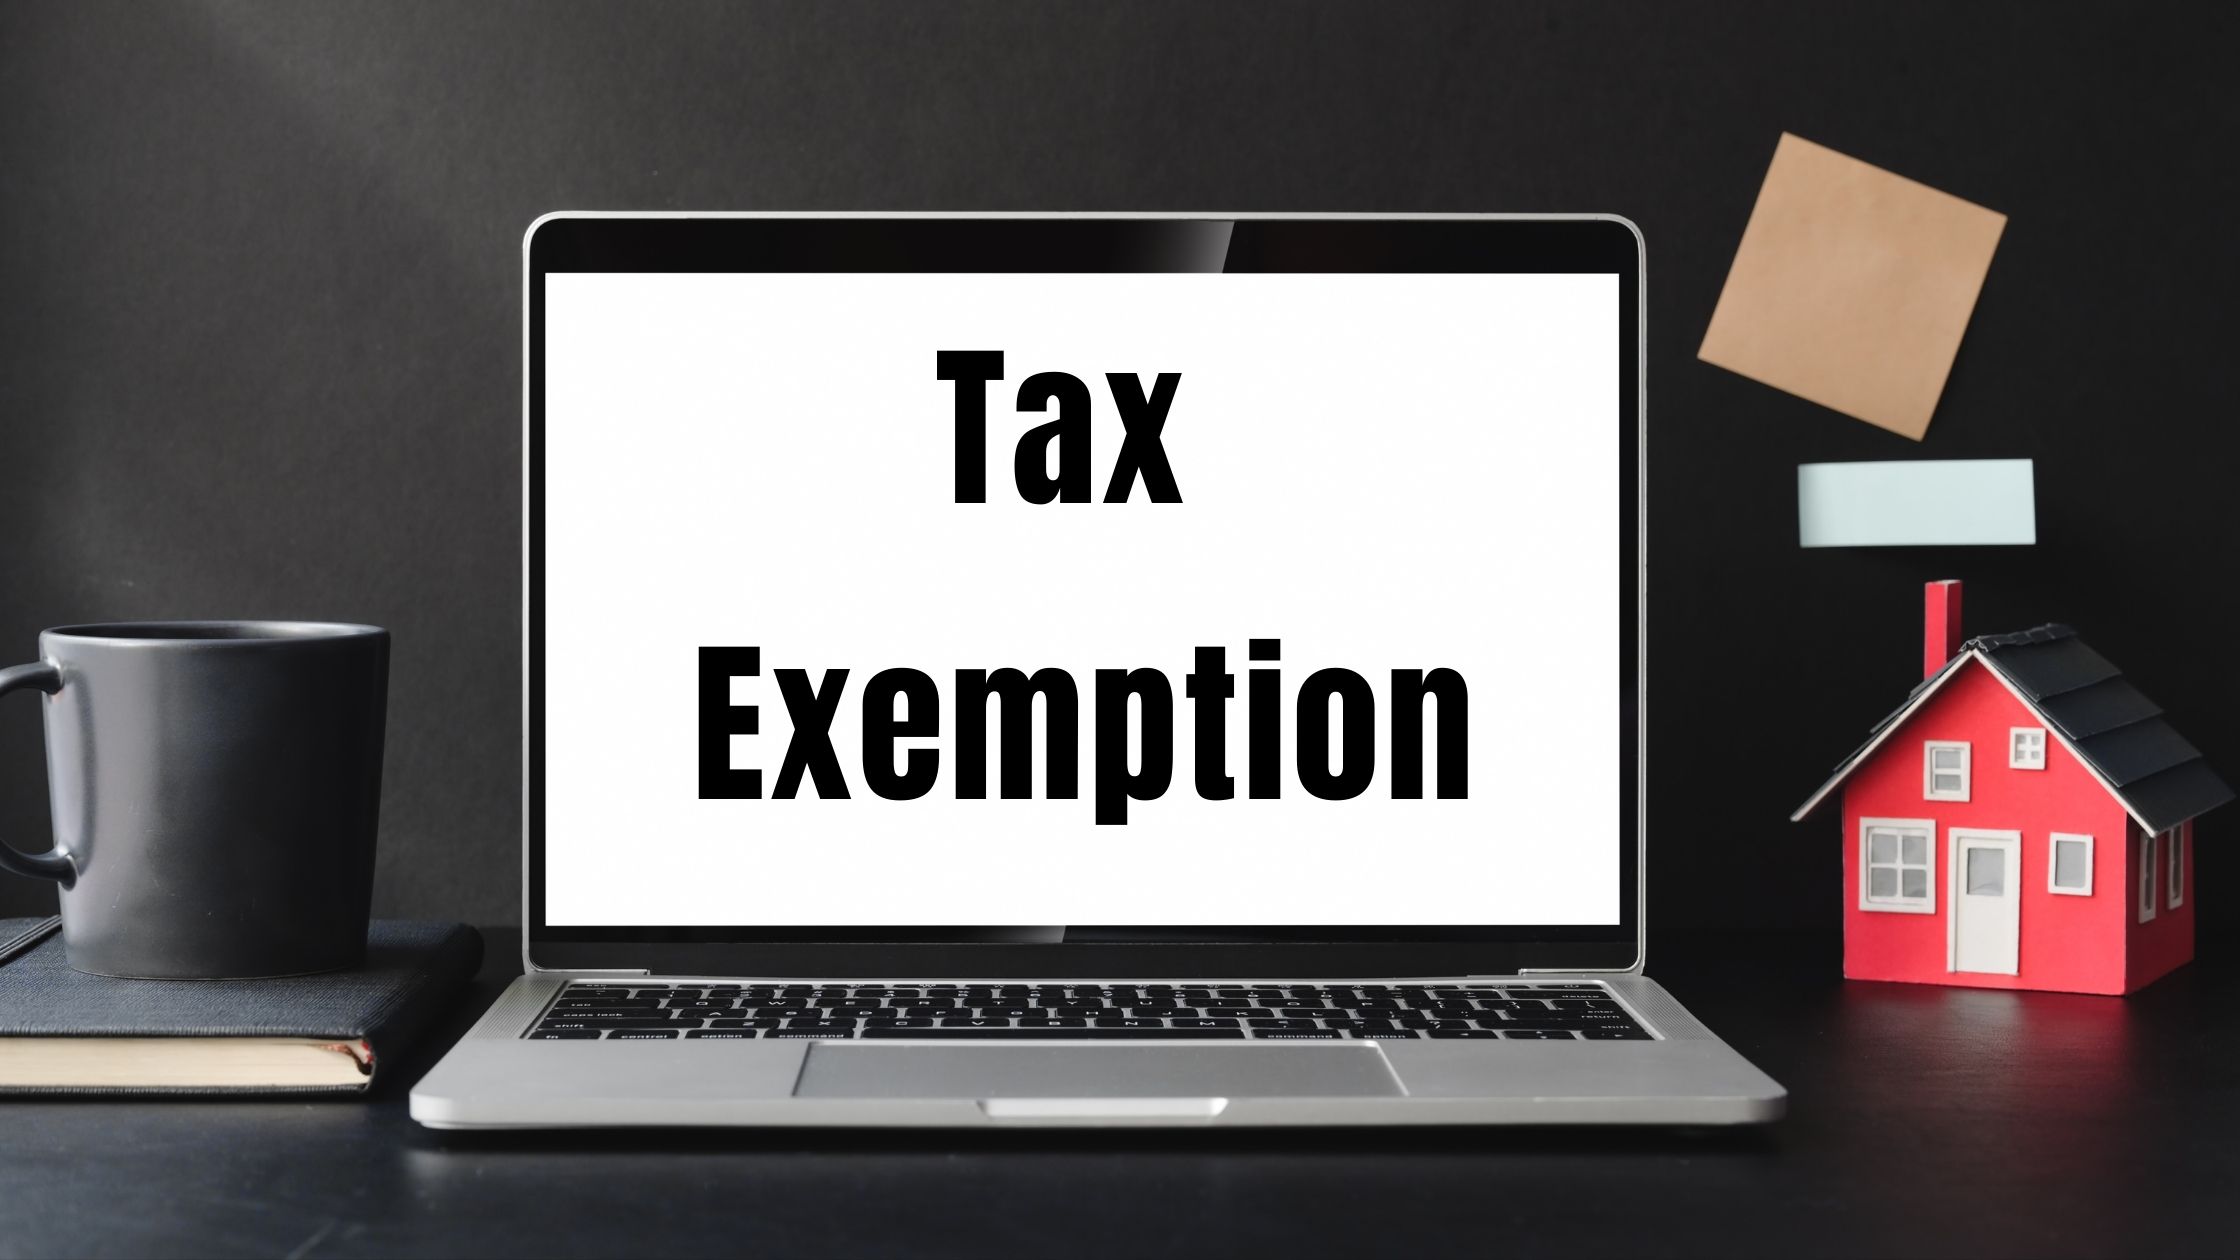 how-to-get-tax-exemption-on-personal-loan-tax-parley